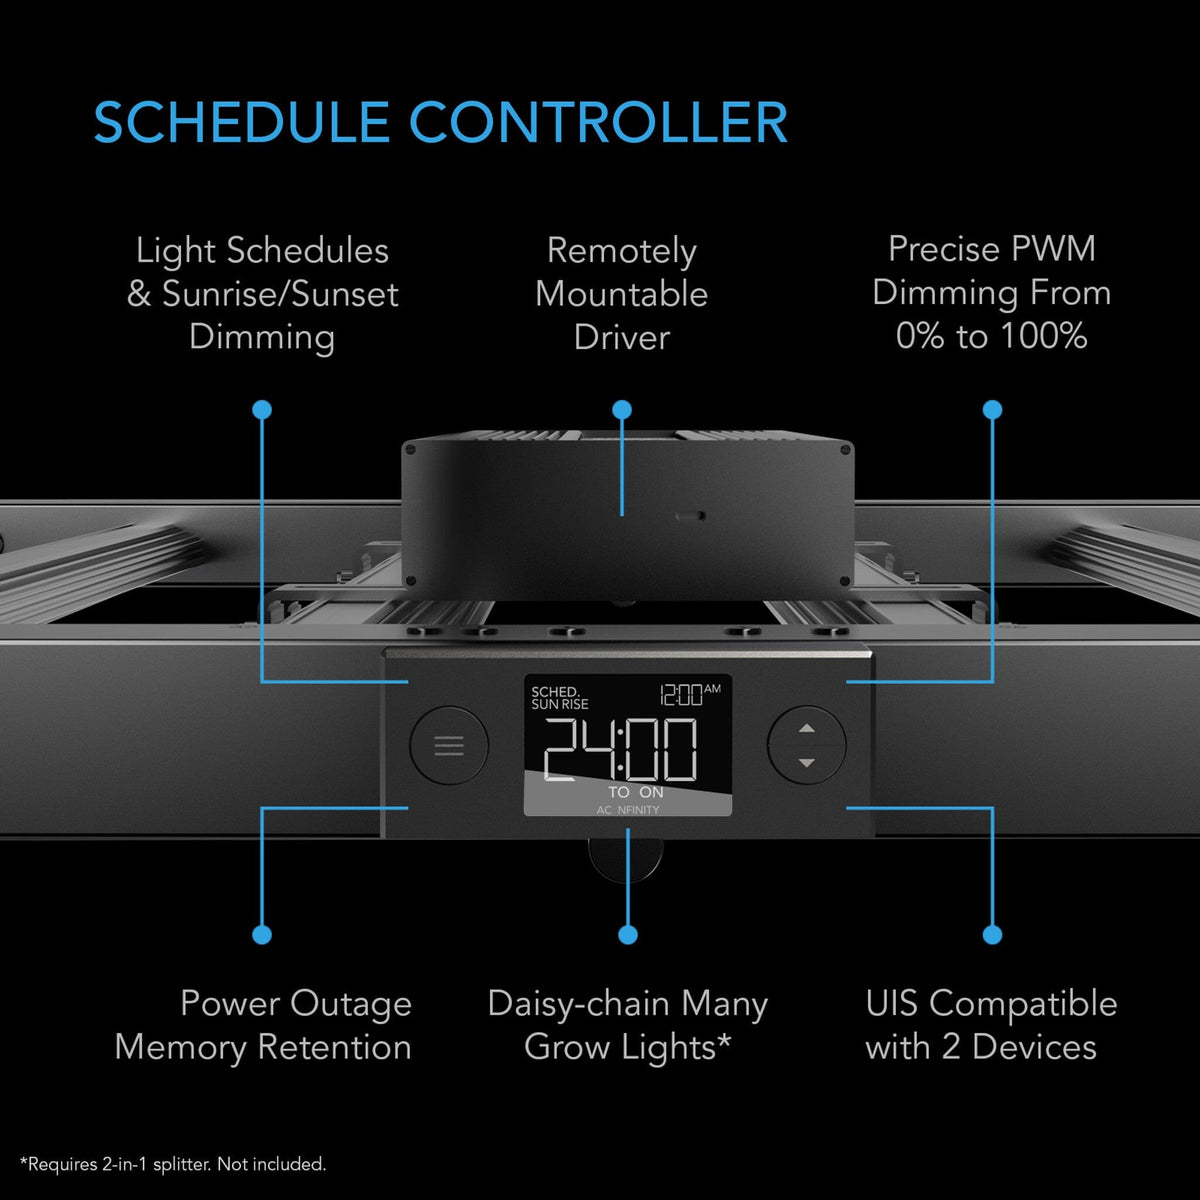 Scheduled controller ionframe